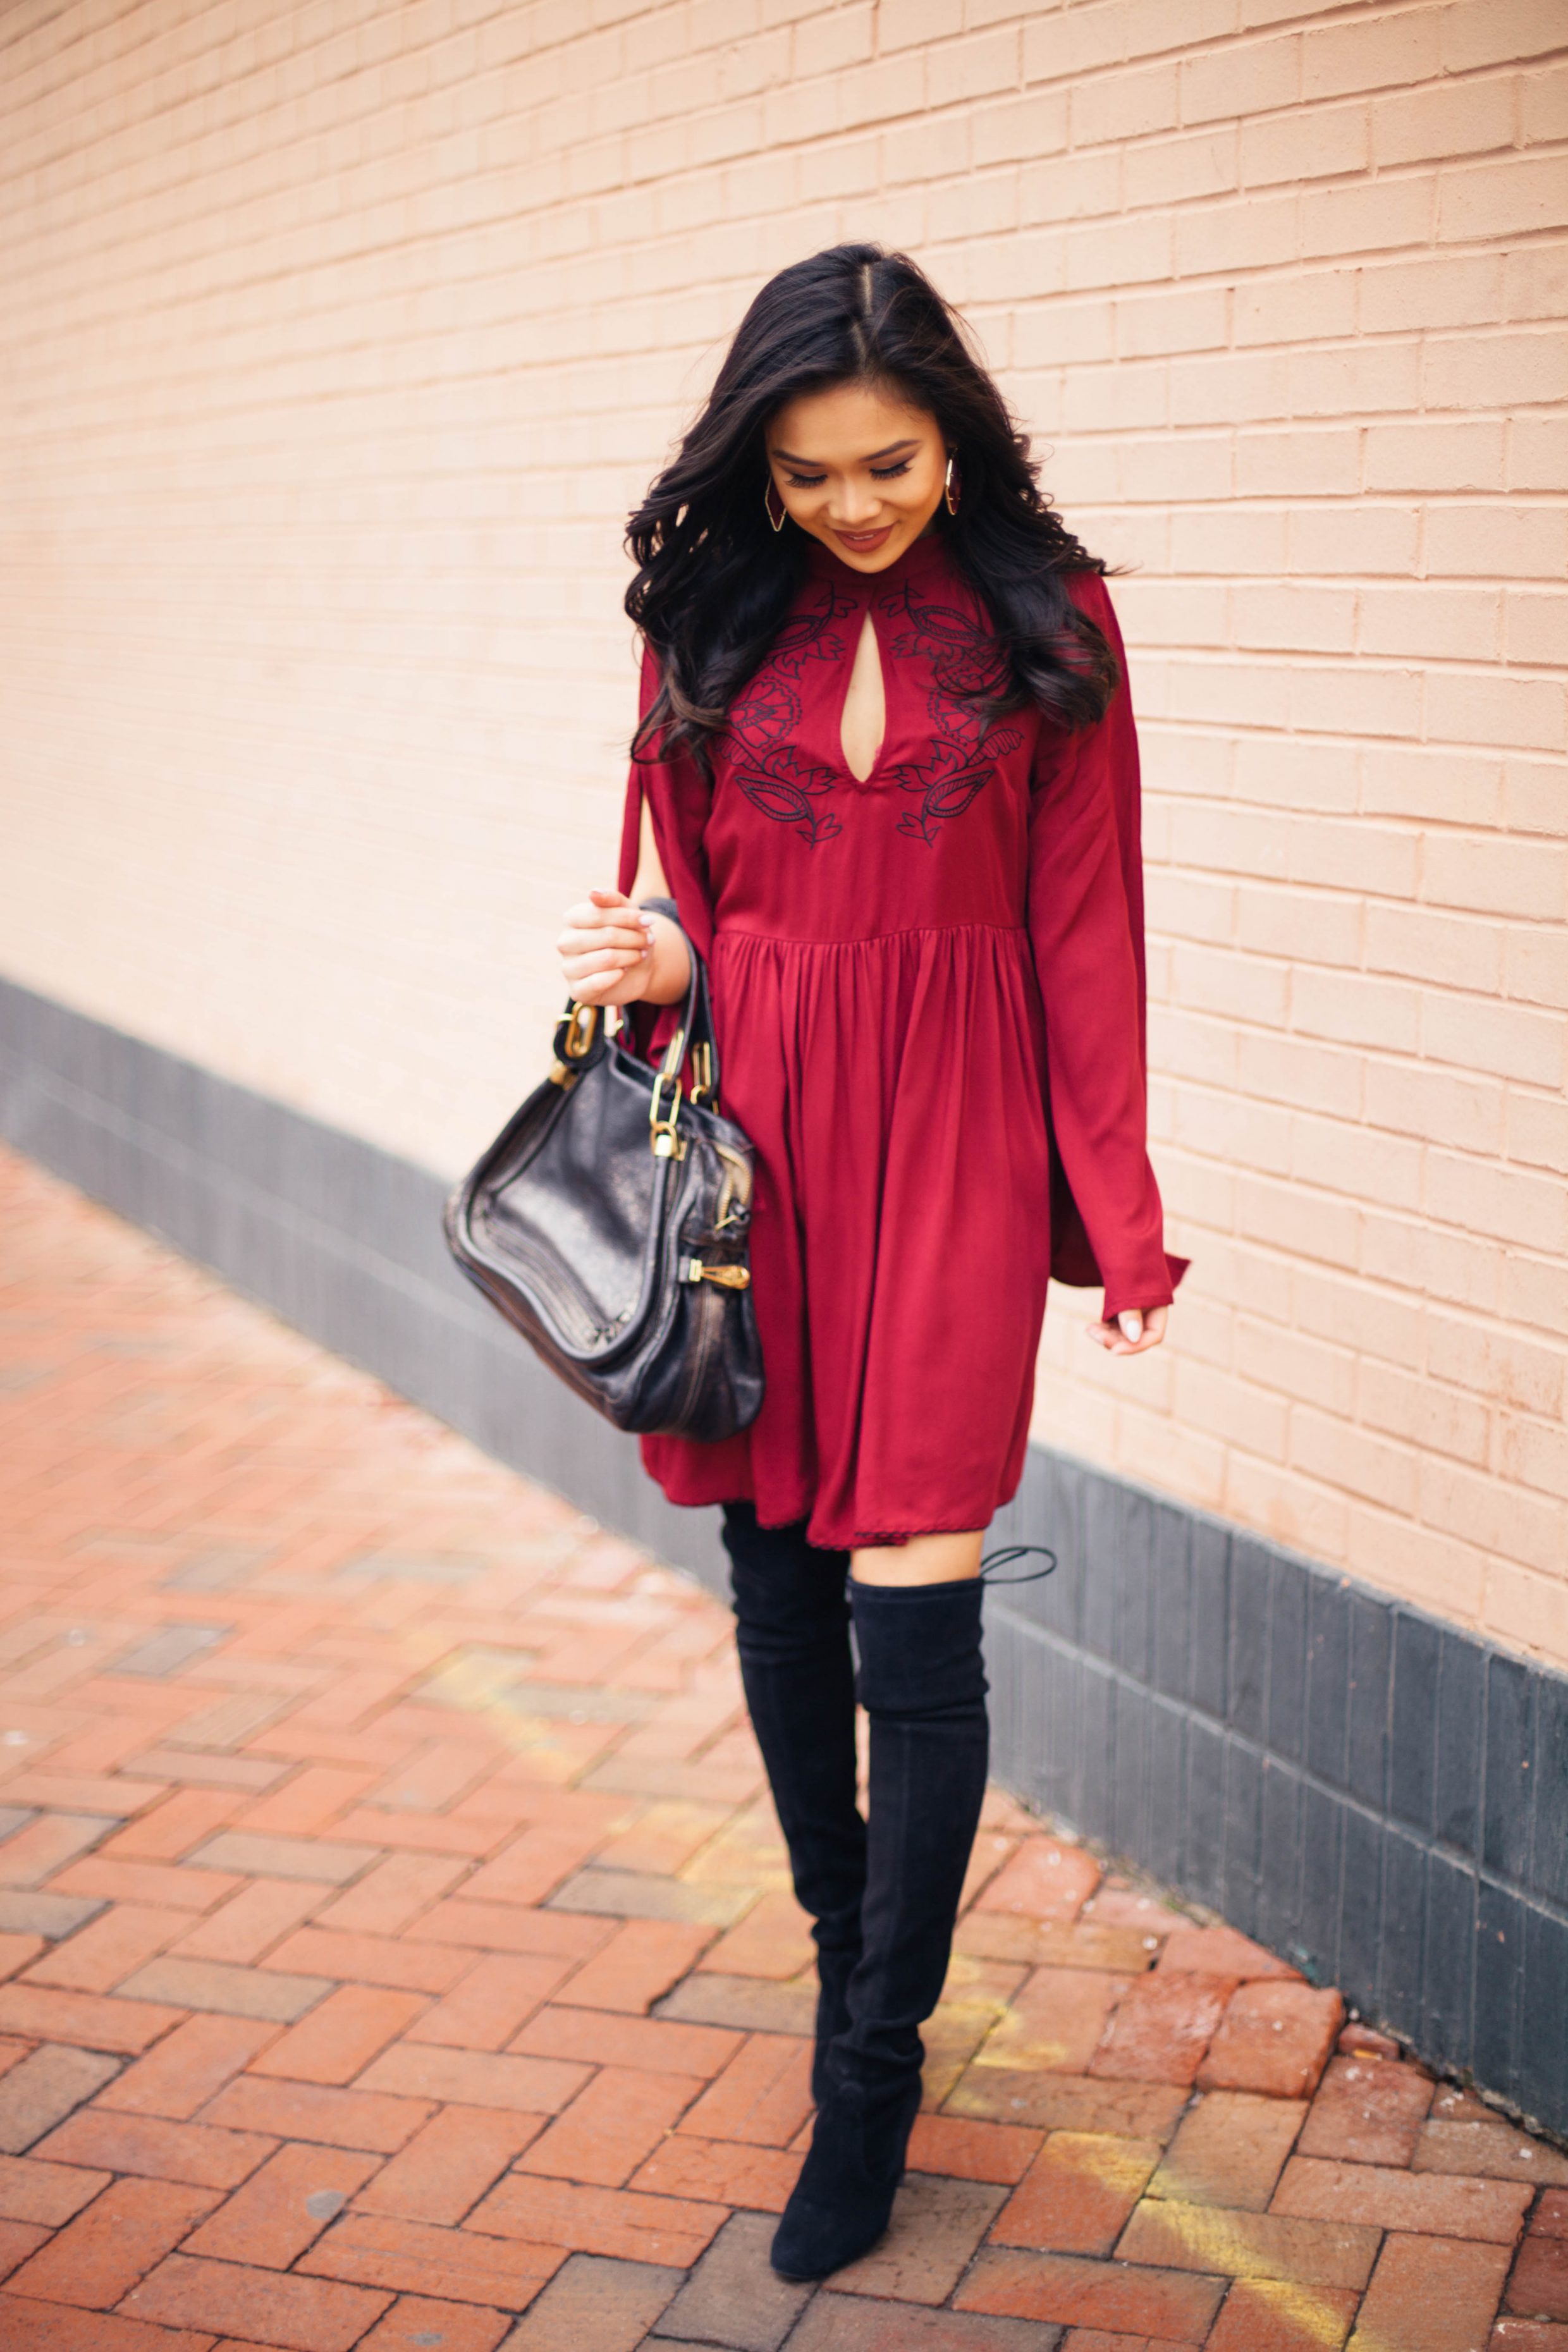 Blogger Hoang-Kim wears a MINKPINK Valley of the Vine embroidered dress in wine red with over the knee boots